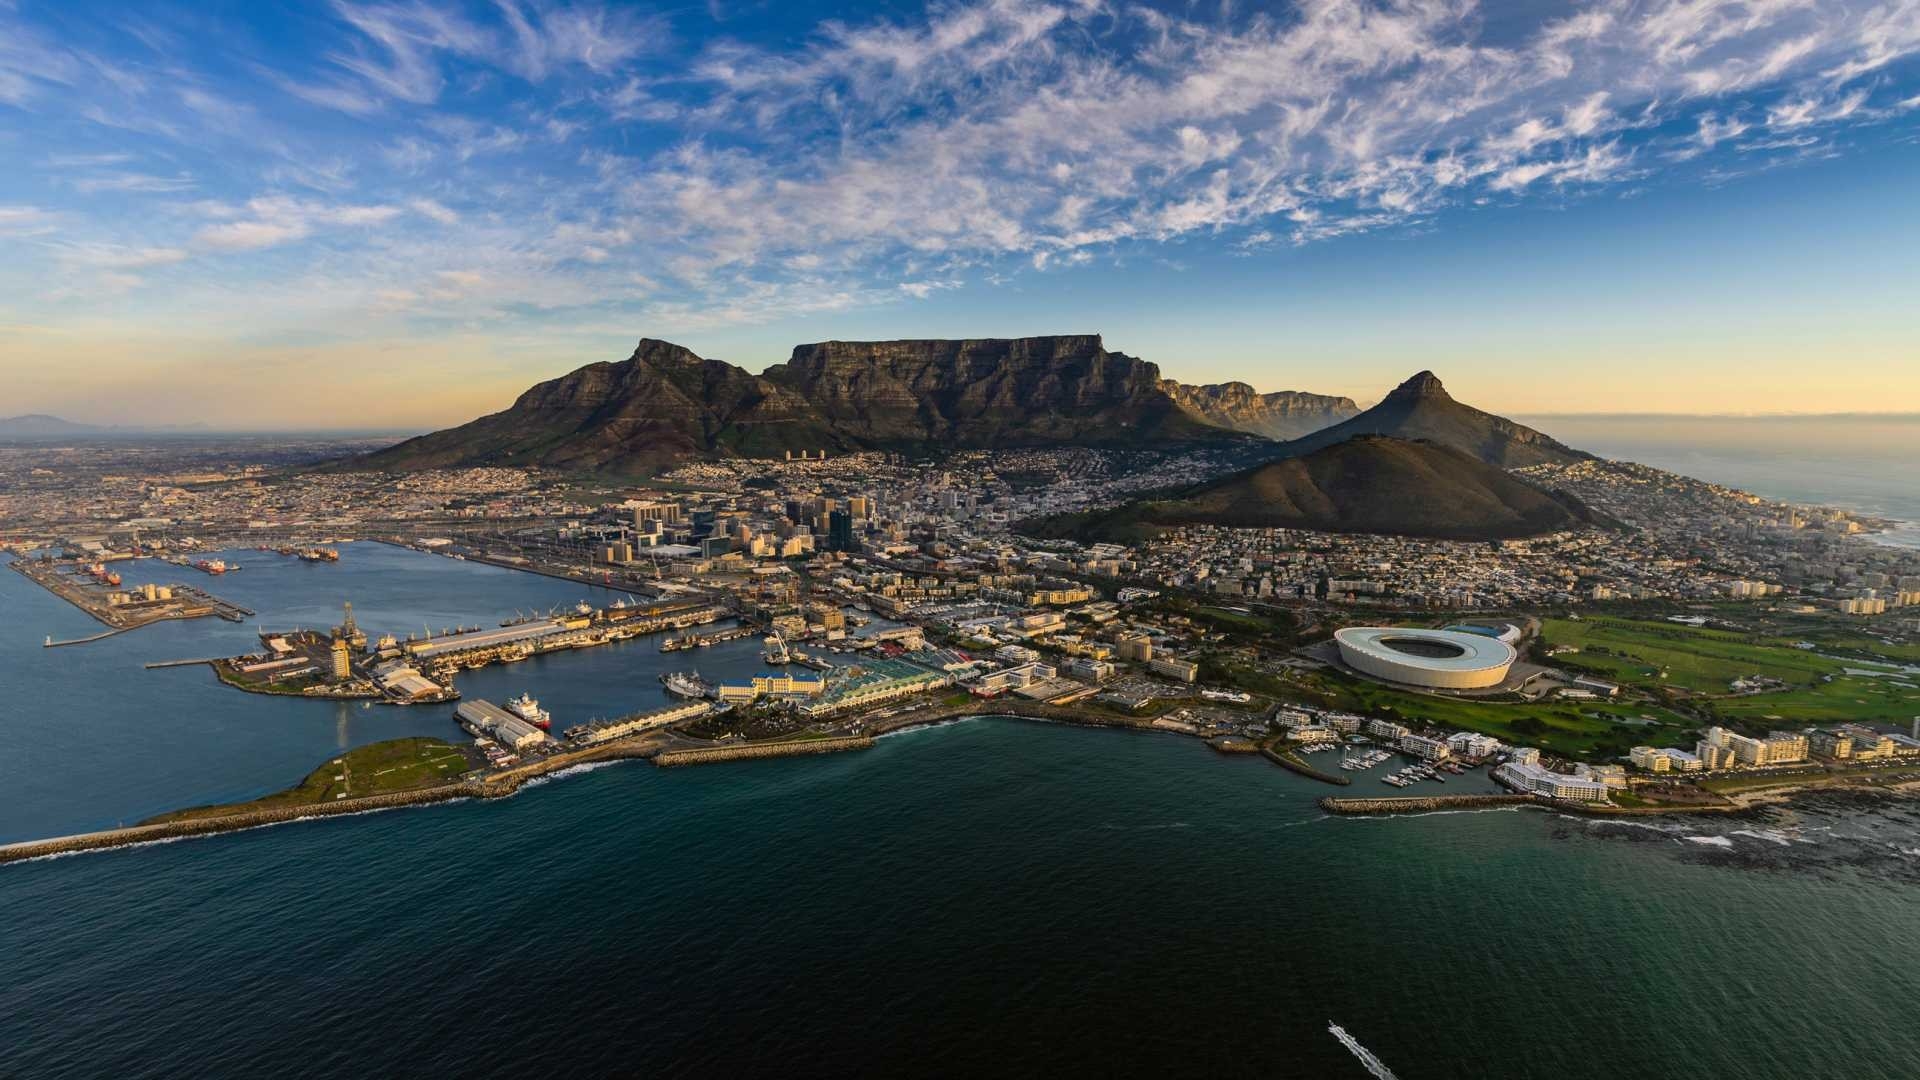 South Africa Holidays | Book For 2019/2020 With Our South-2020 Holidays South Africa